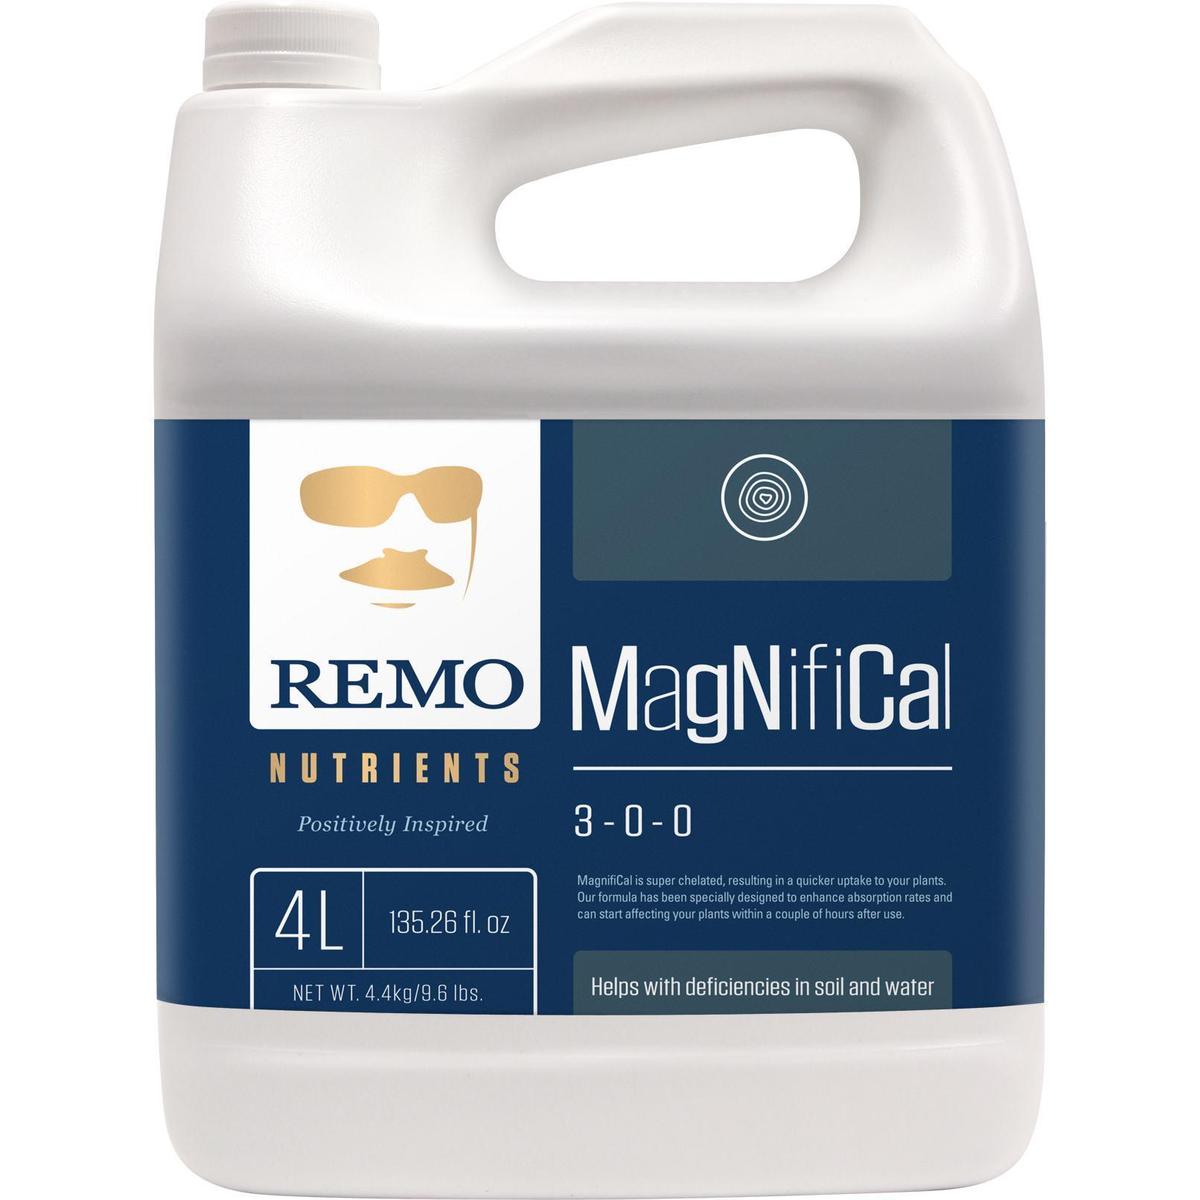 Product Secondary Image:Remo Nutrients Magnifical (3-0-0)